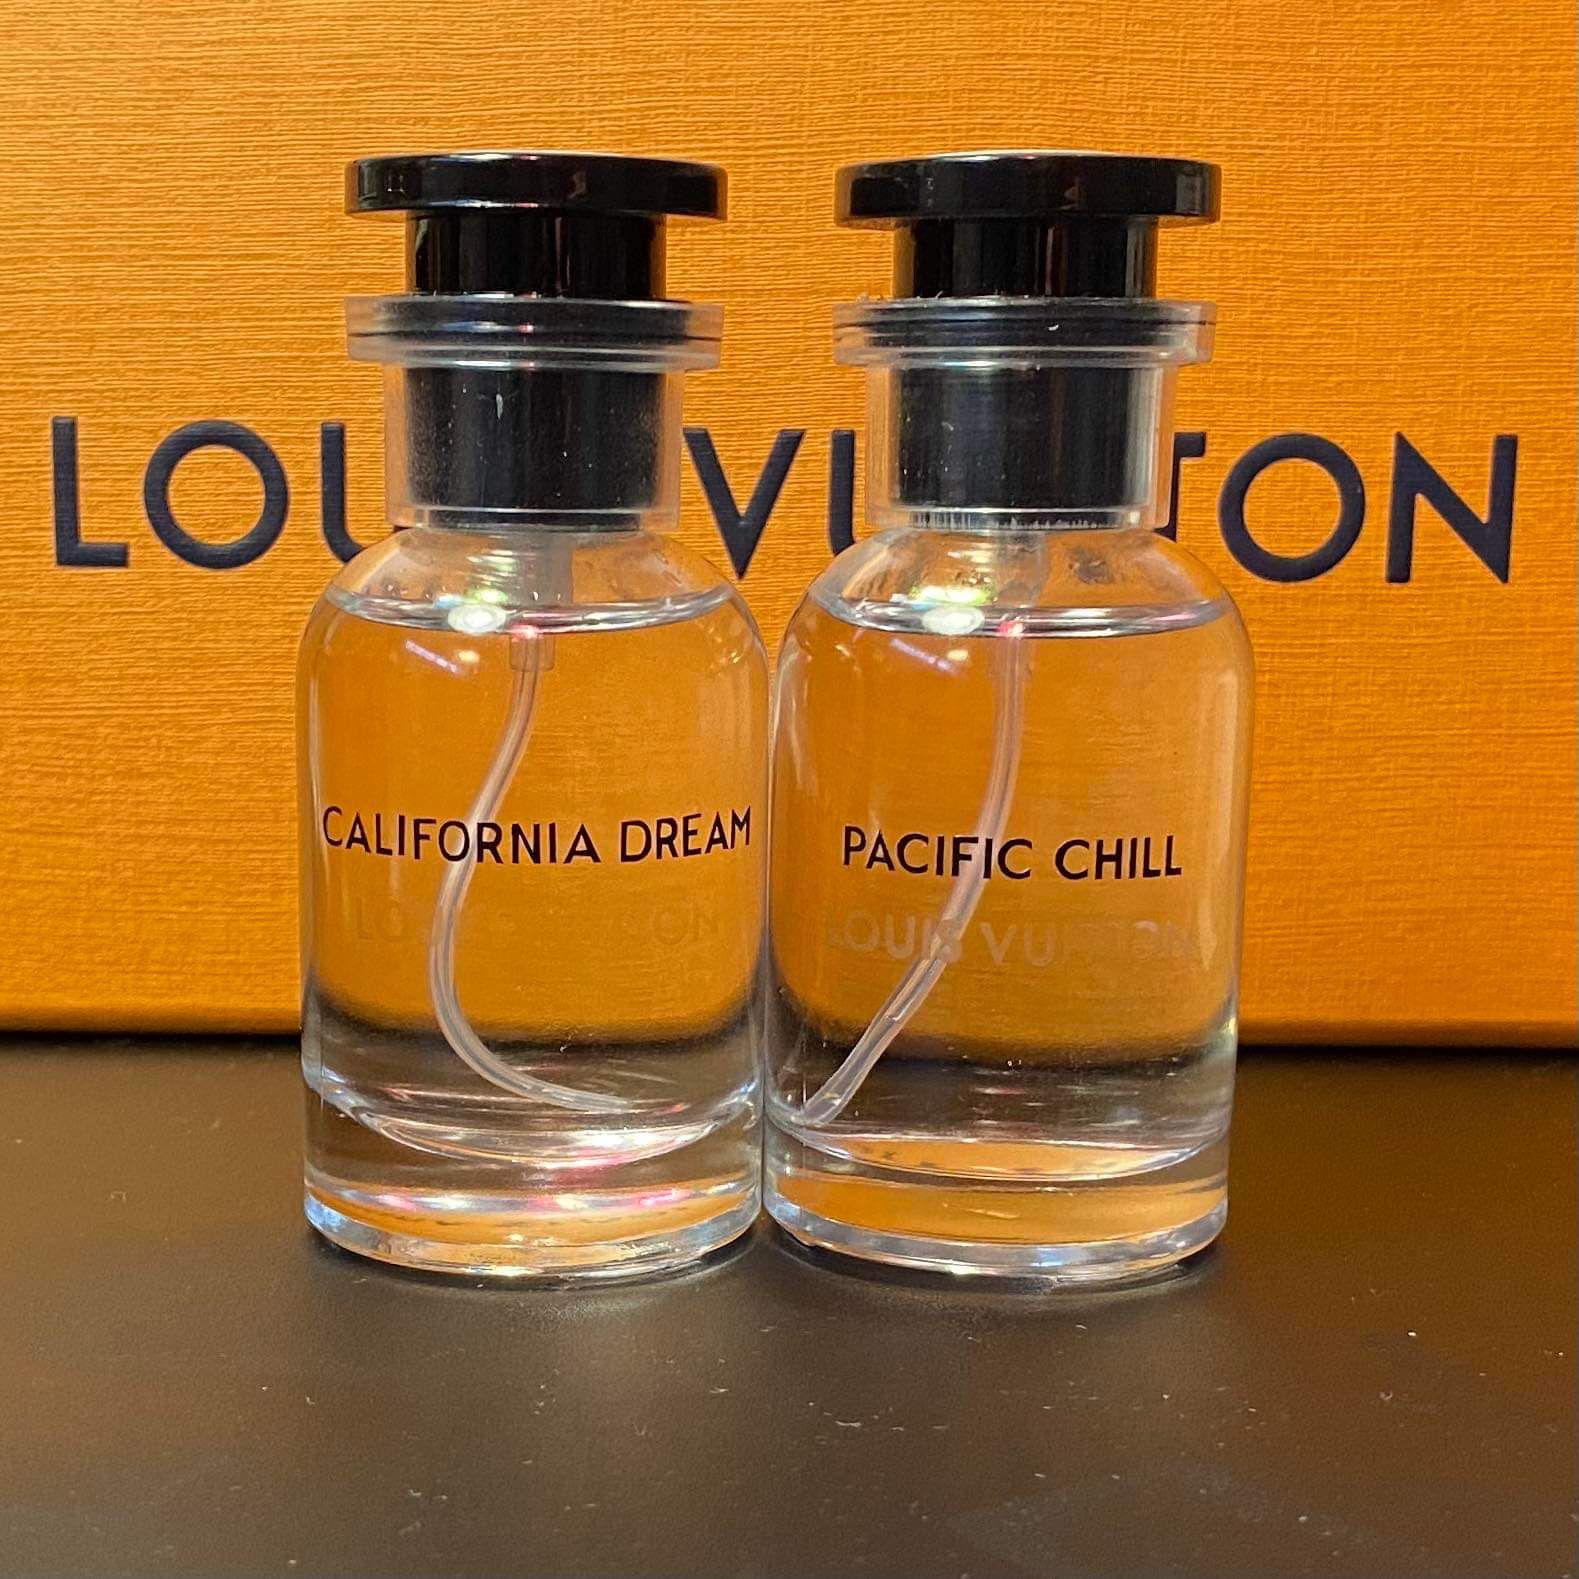 Louis Vuitton Pacific Chill 30ml for Sale in Oakland Park, FL